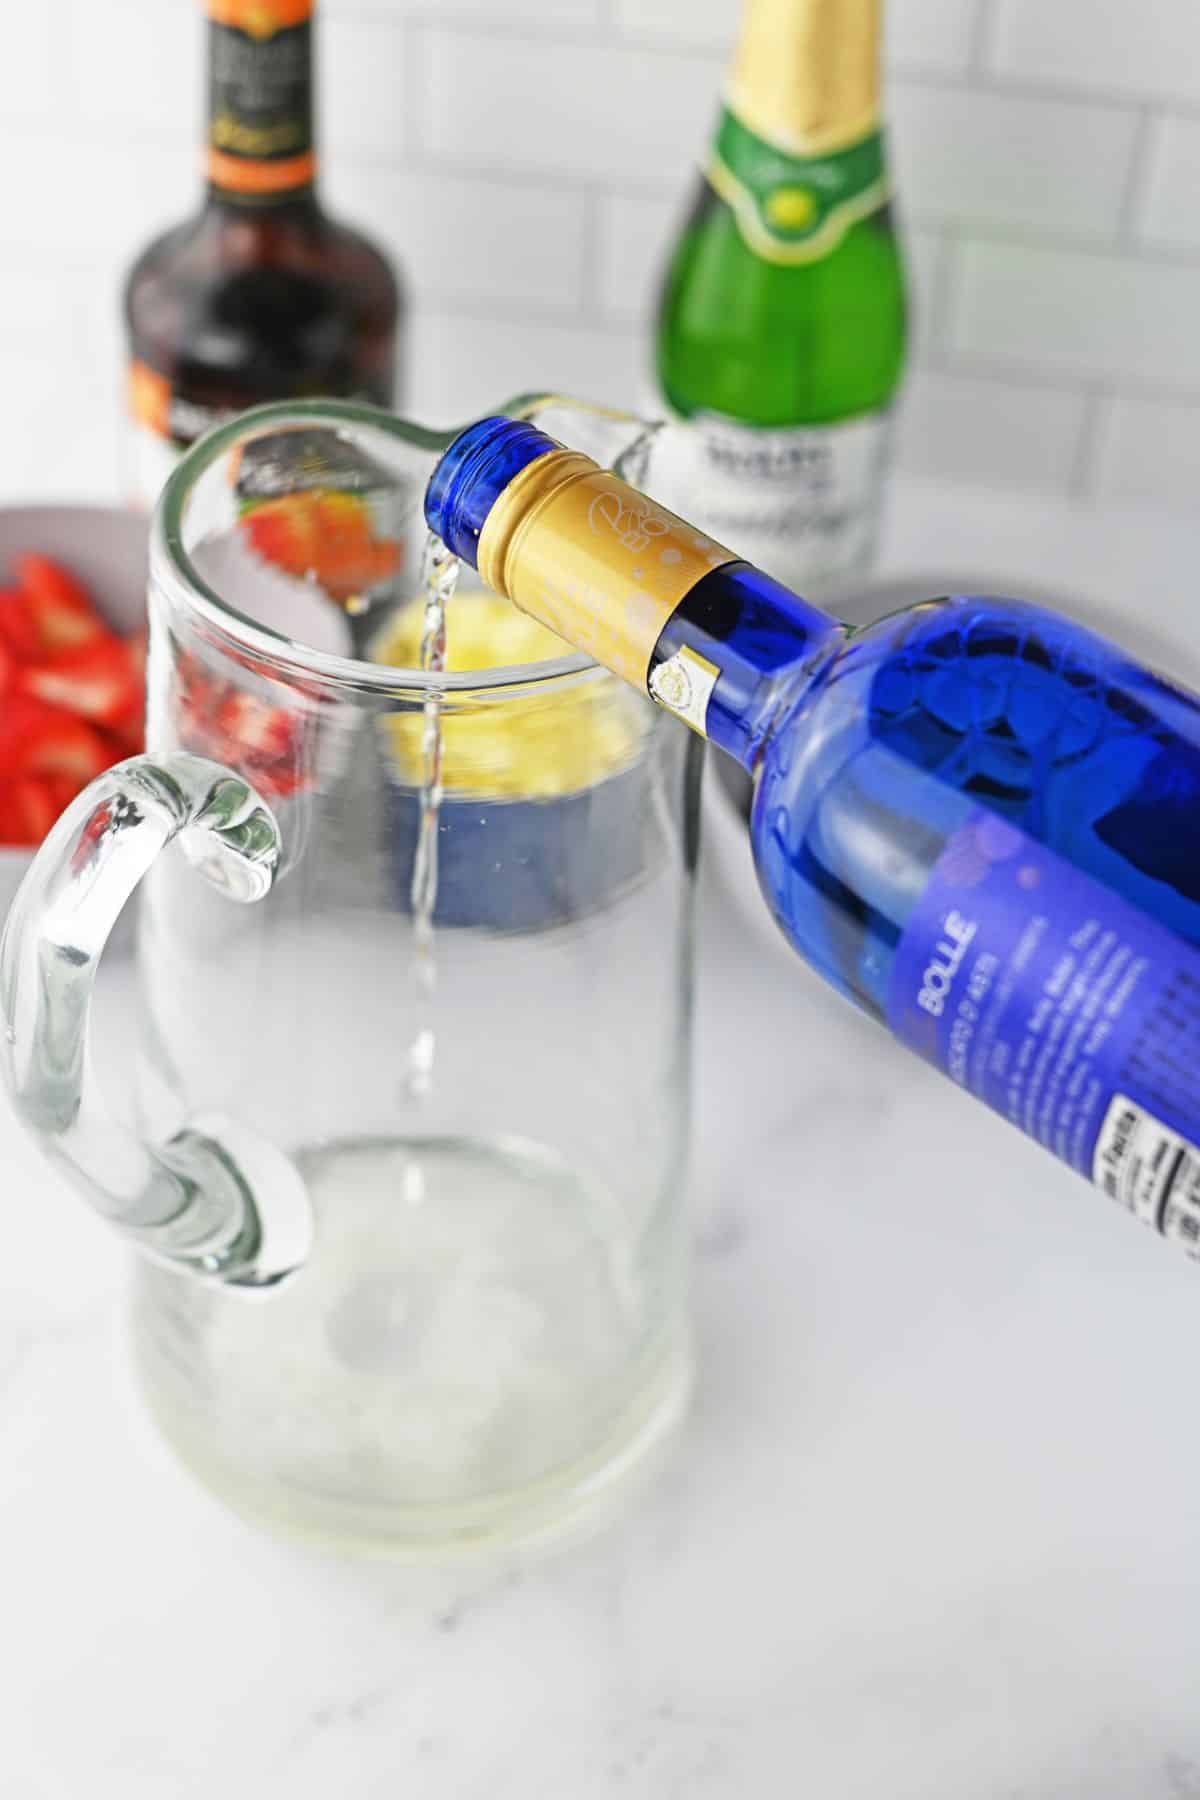 blue bottle of Moscato being poured into large glass pitcher